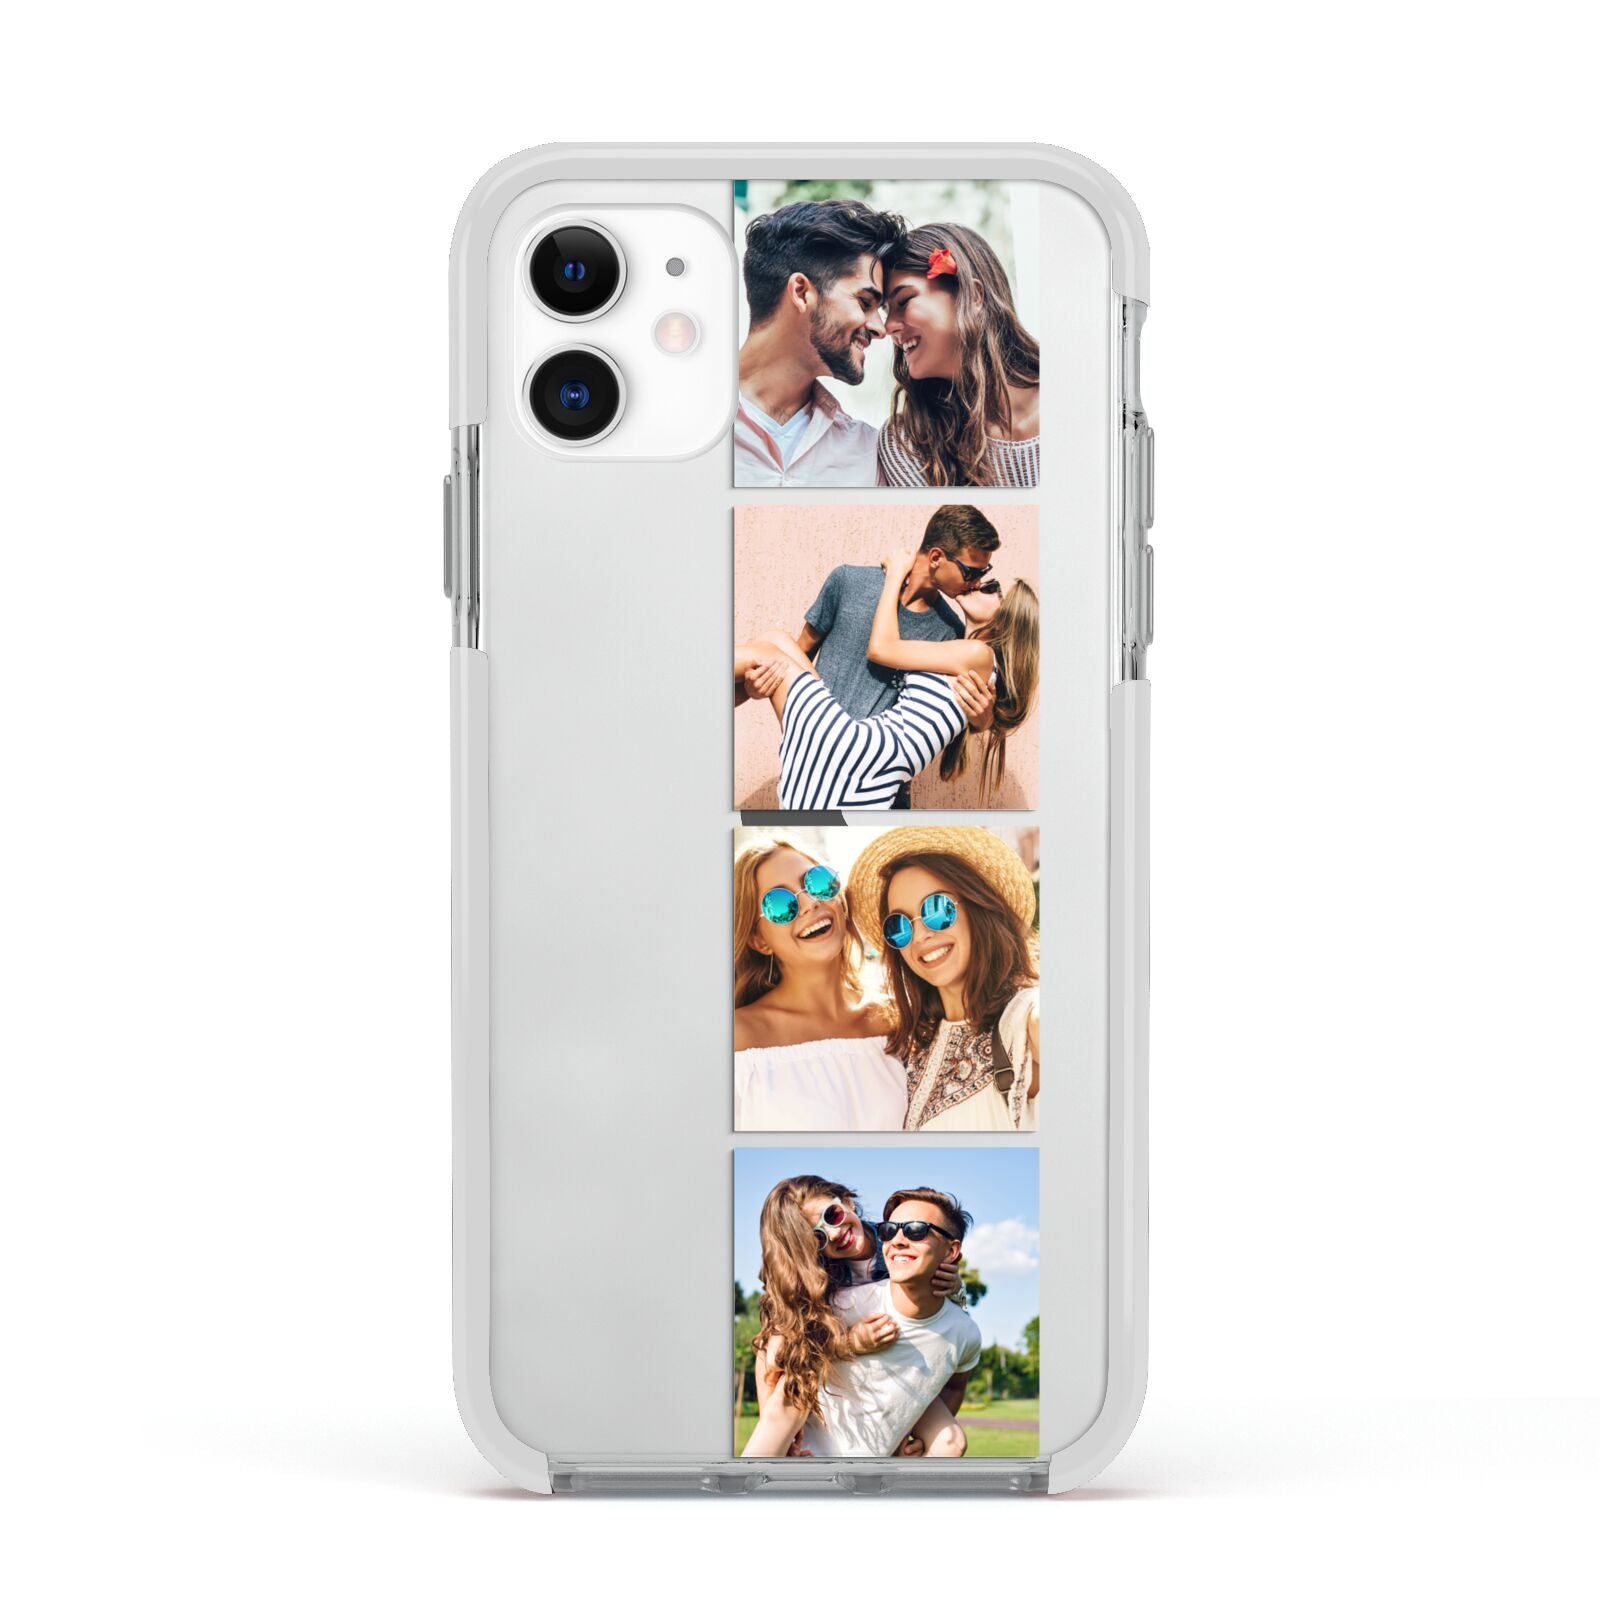 Photo Strip Montage Upload Apple iPhone 11 in White with White Impact Case